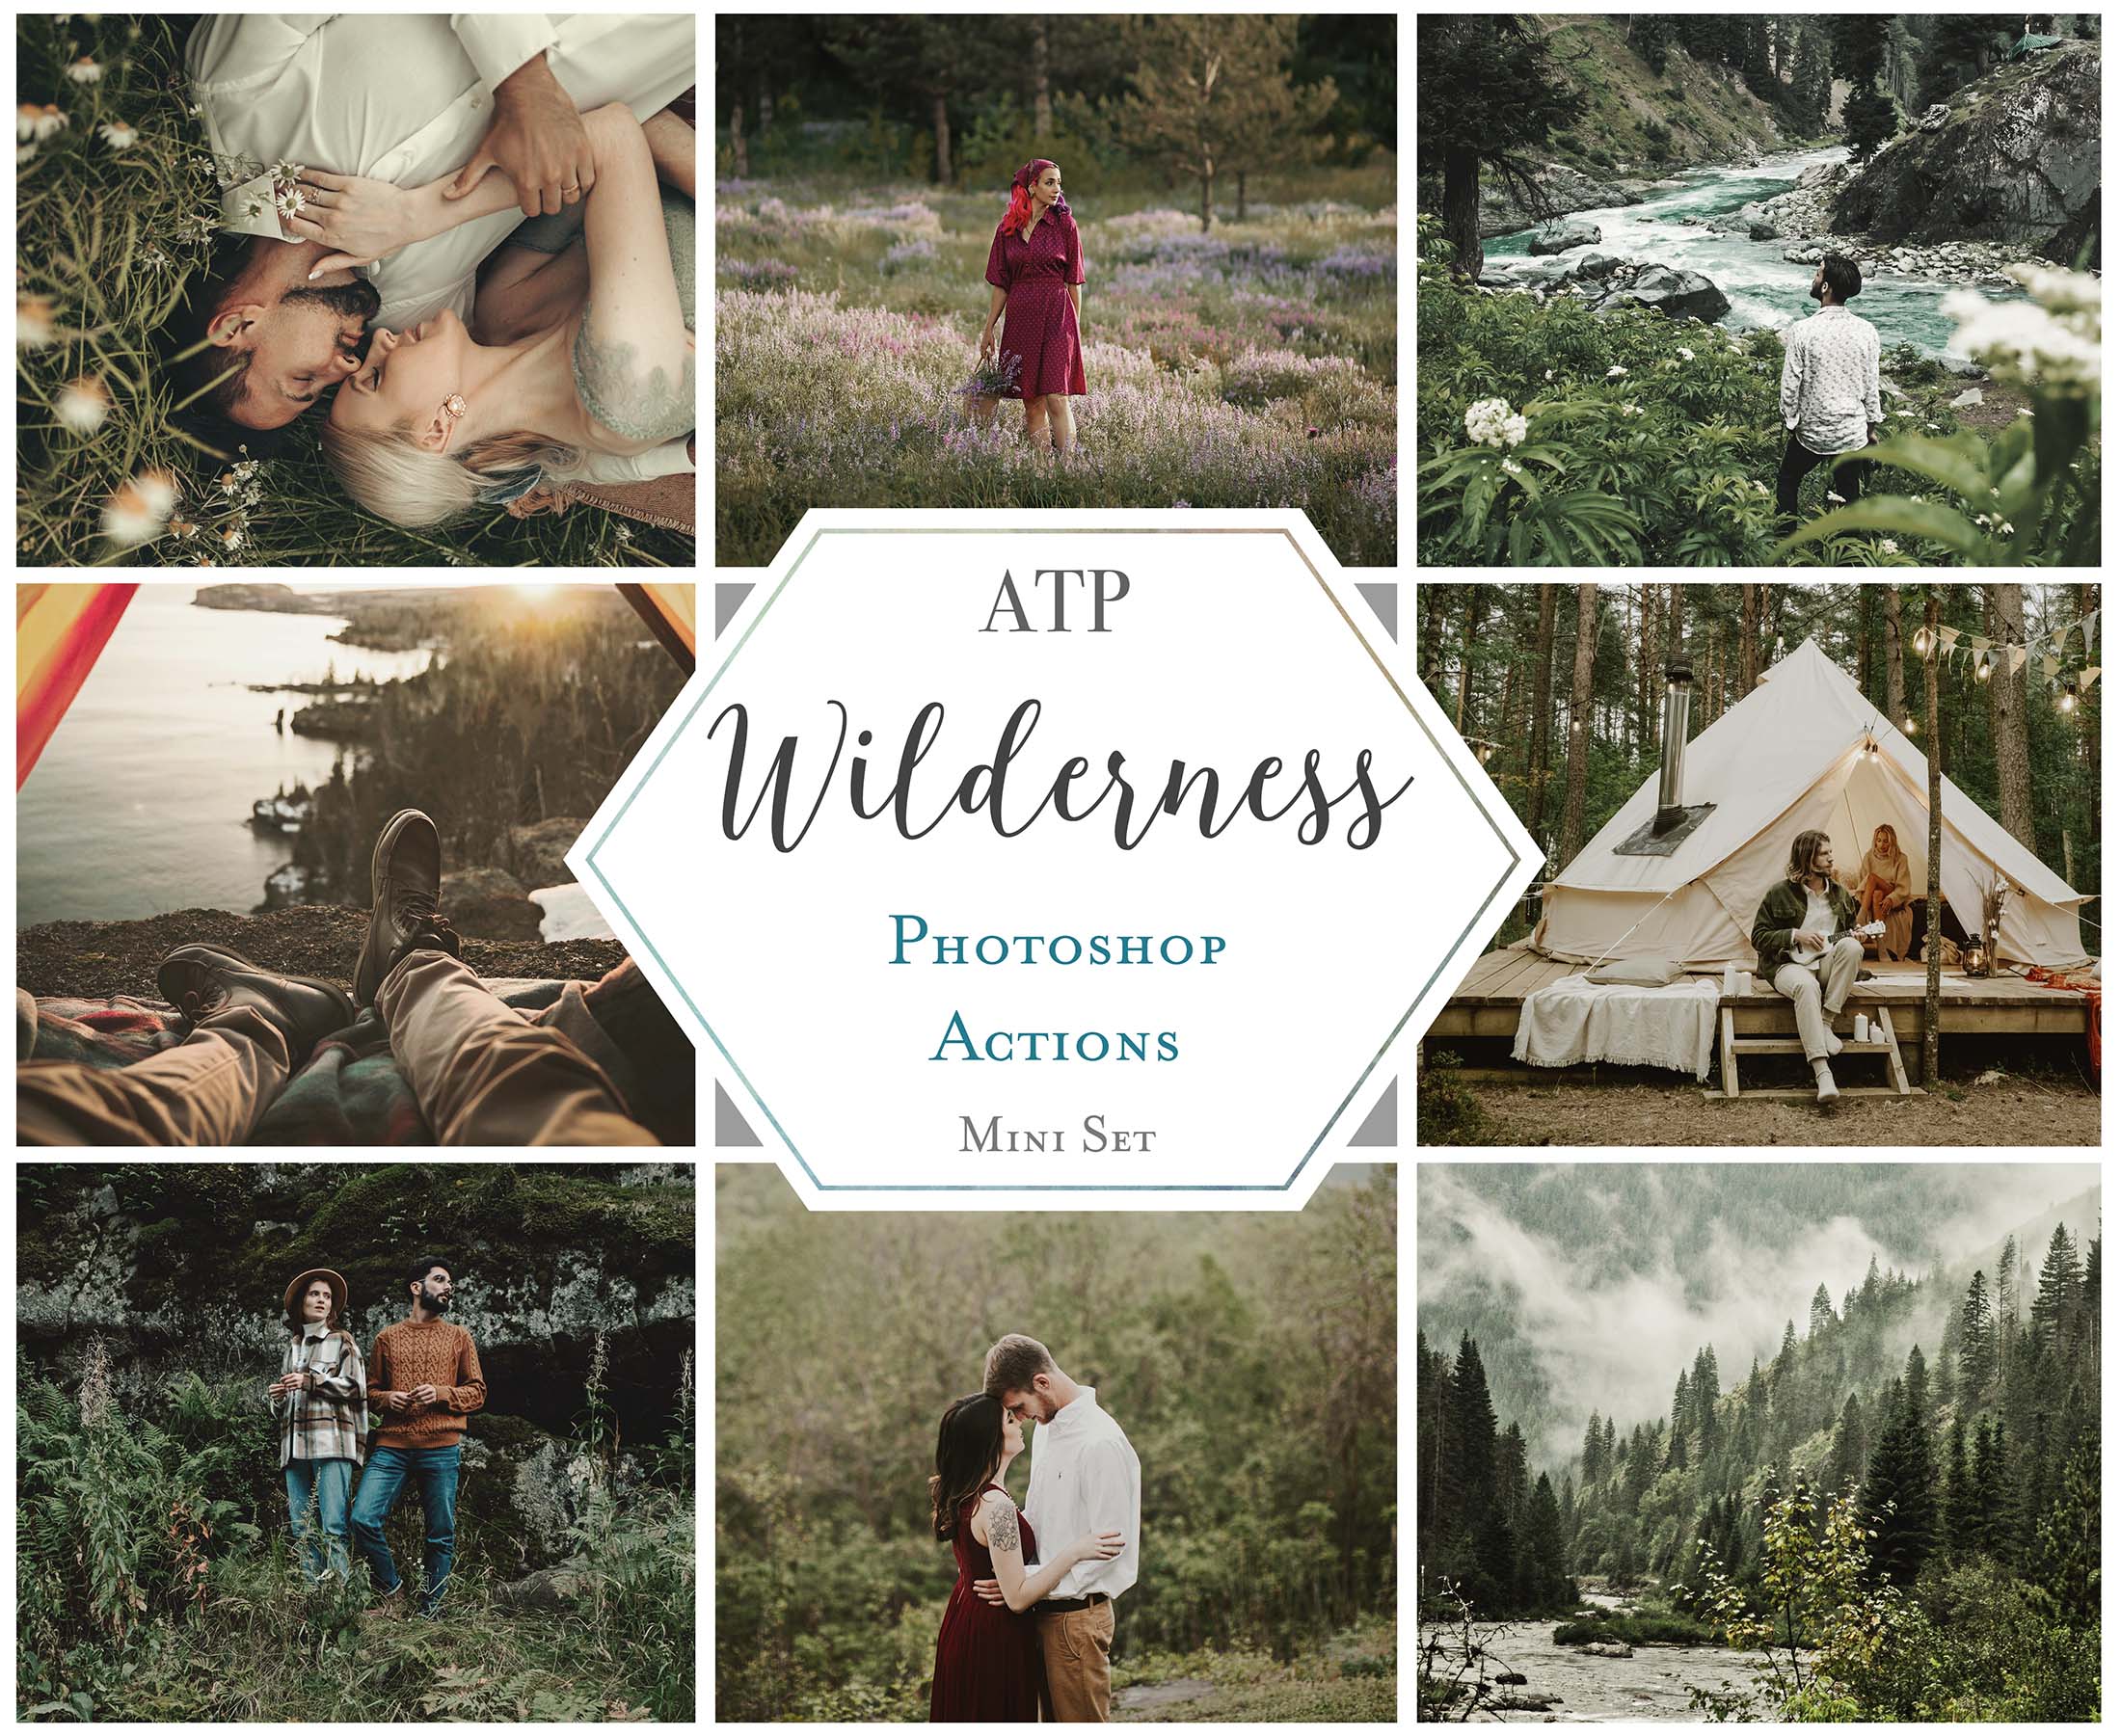 Photoshop Actions for Photography Edits.  PS atn files are compatible with all versions of photoshop above CS6. Photoshop Actions for professional photographers, photo edits and Instagram influencers. Warm, Rich, light, Matte.  For Wedding, Newborn, Studio Photography. By ATP Textures